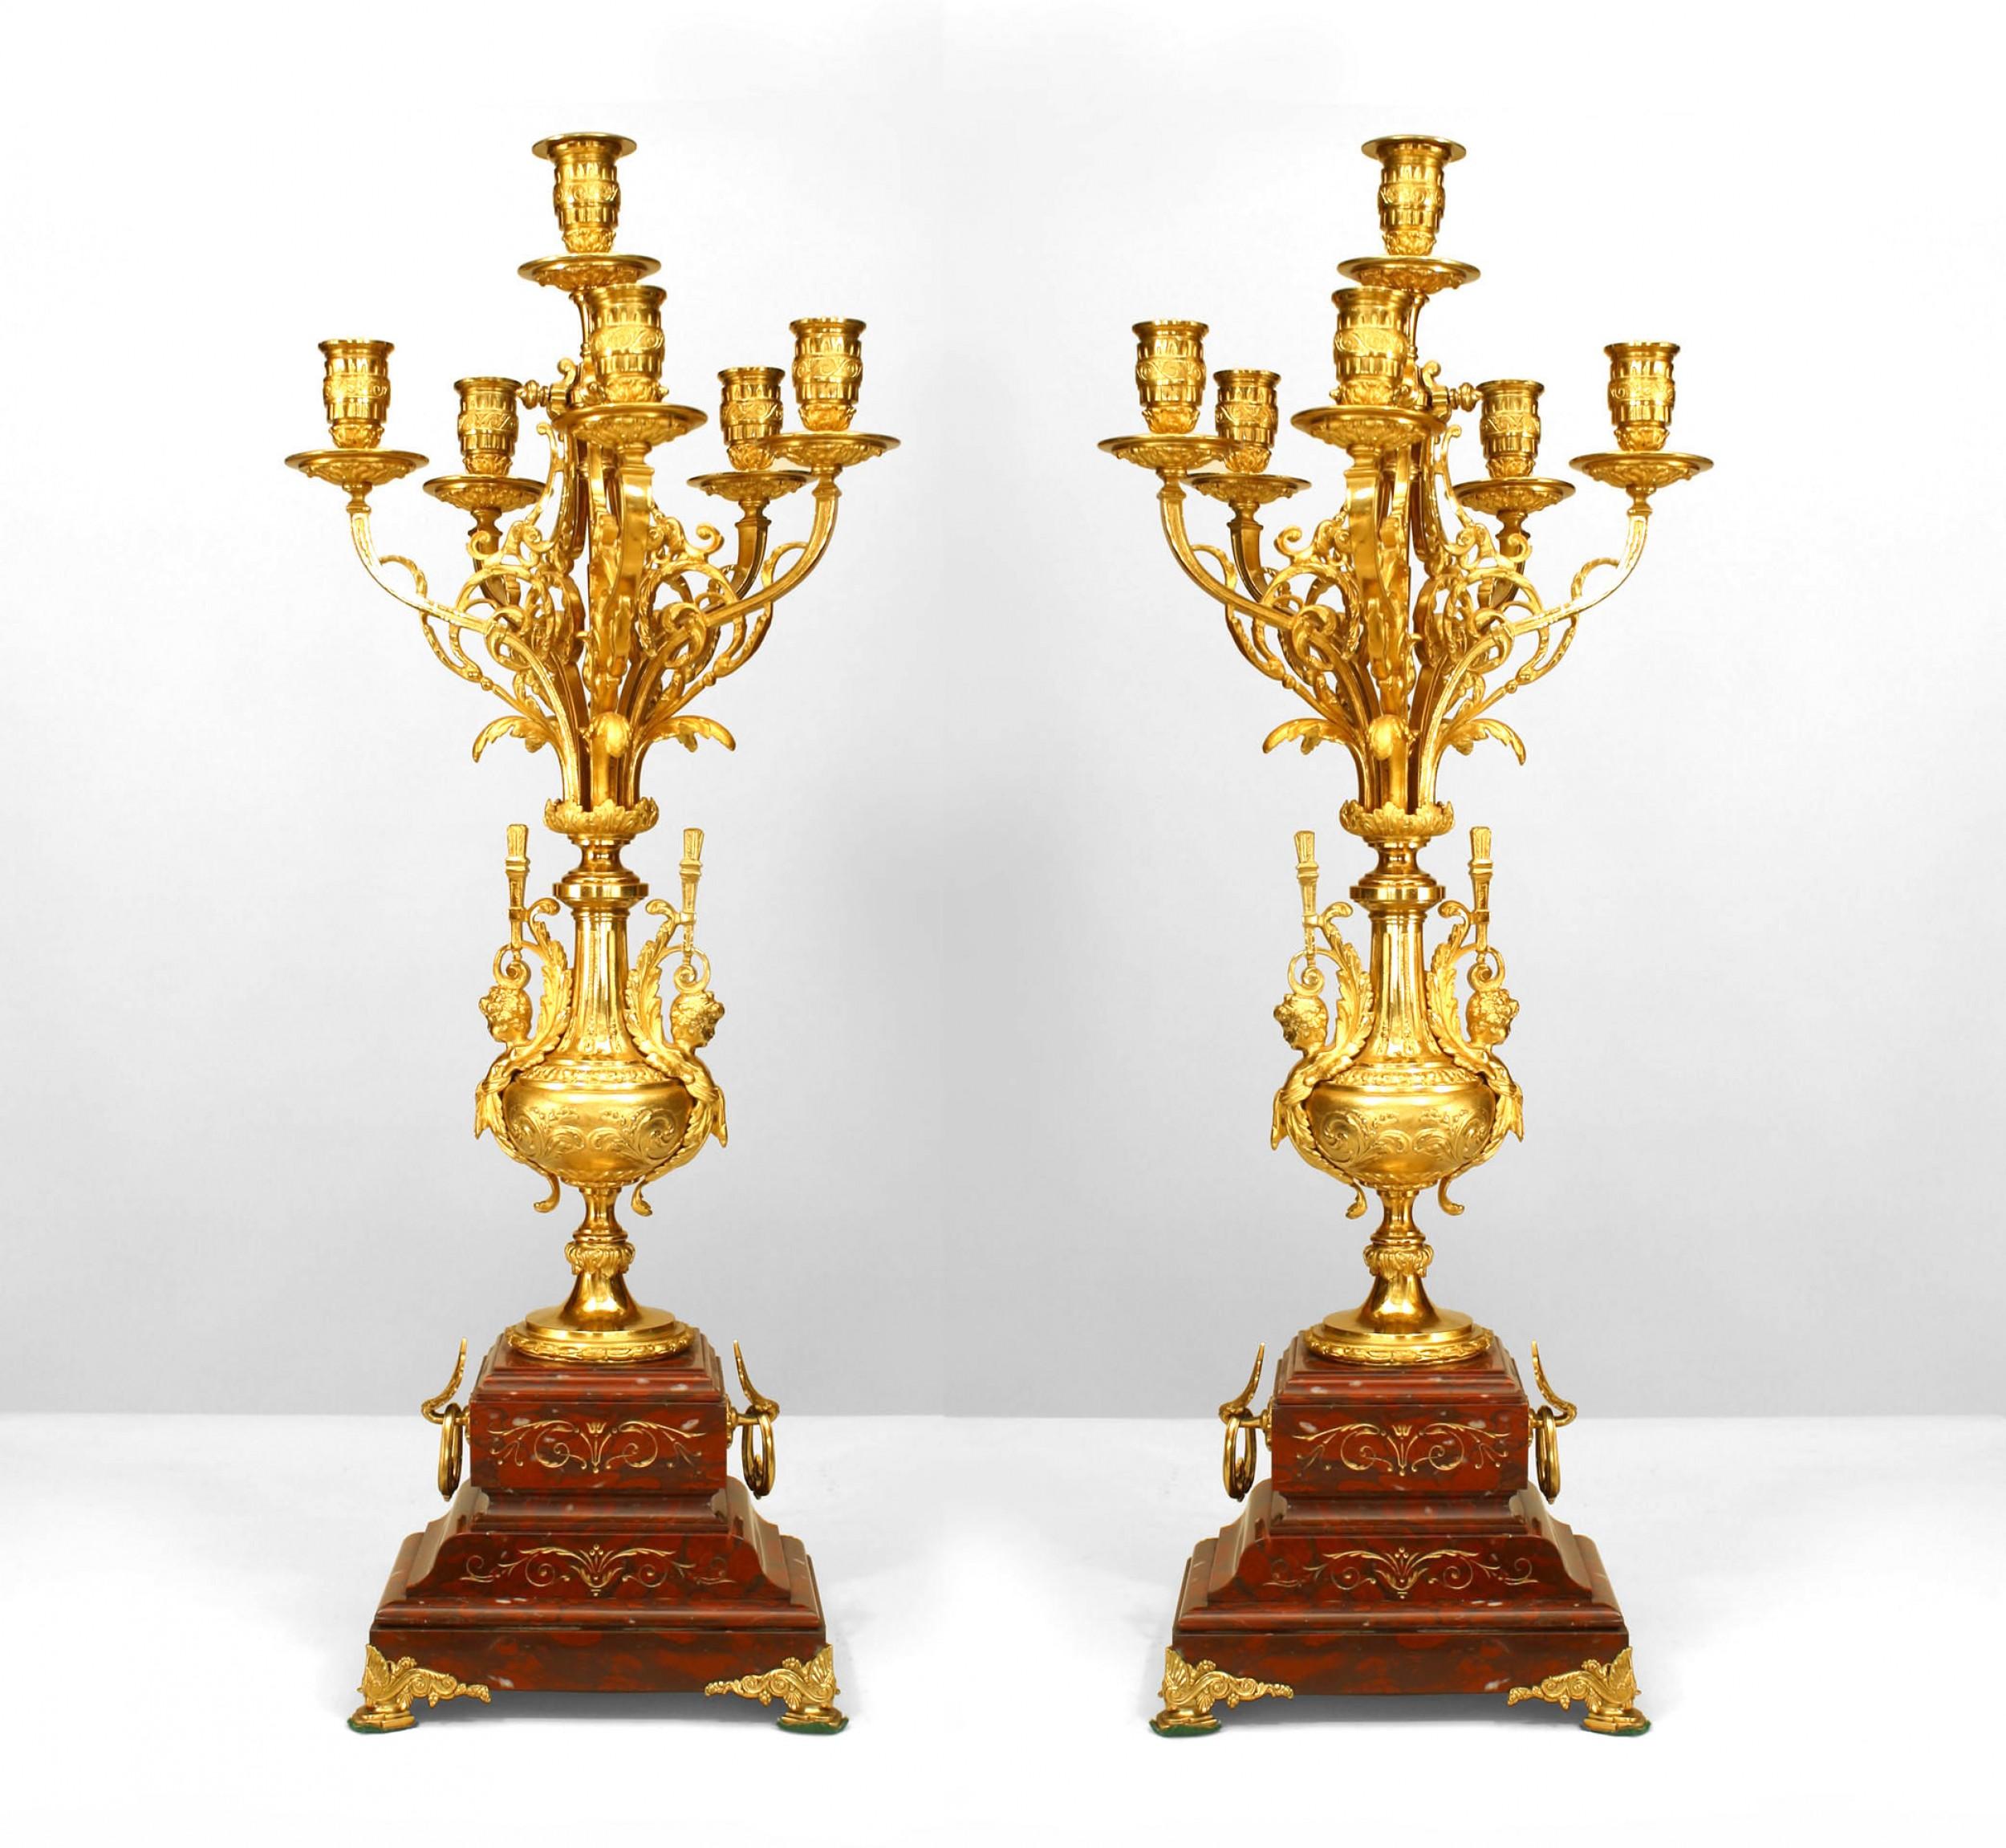 PAIR of French Victorian rouge marble and gilt bronze 6 arm candelabra with a gilt bronze urn over a tiered base (PRICED AS PAIR).